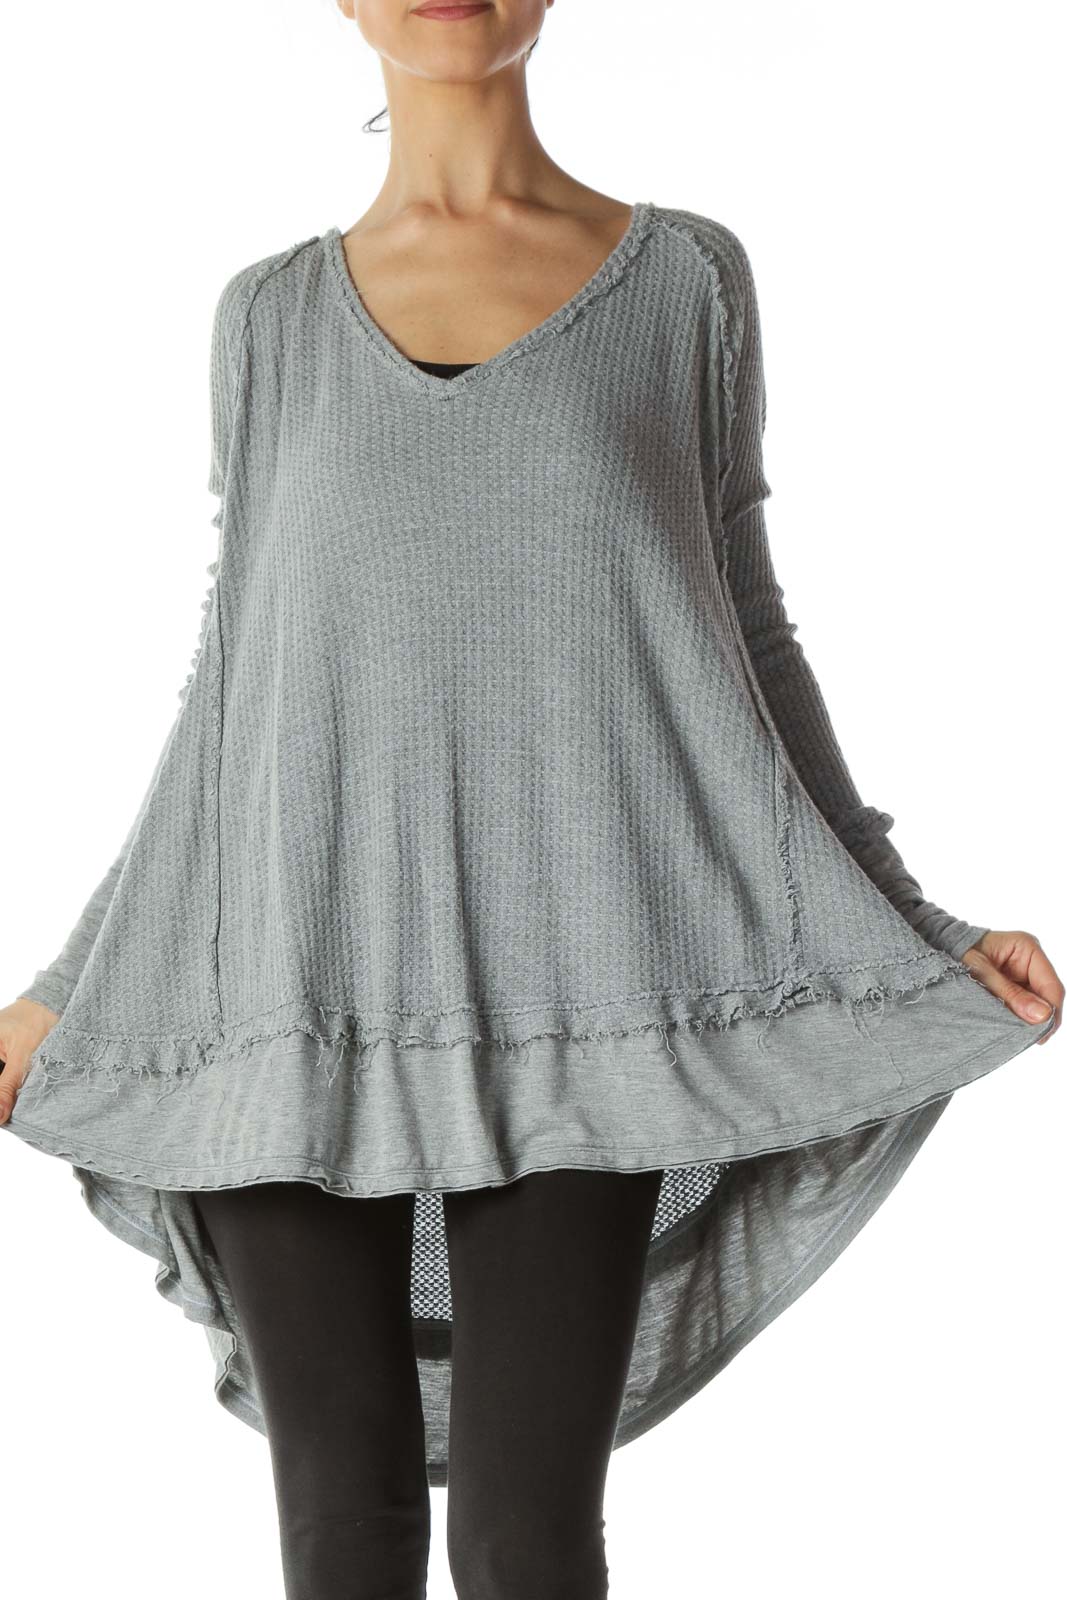 Gray Raw Trim Details Soft Textured Knit Top Front